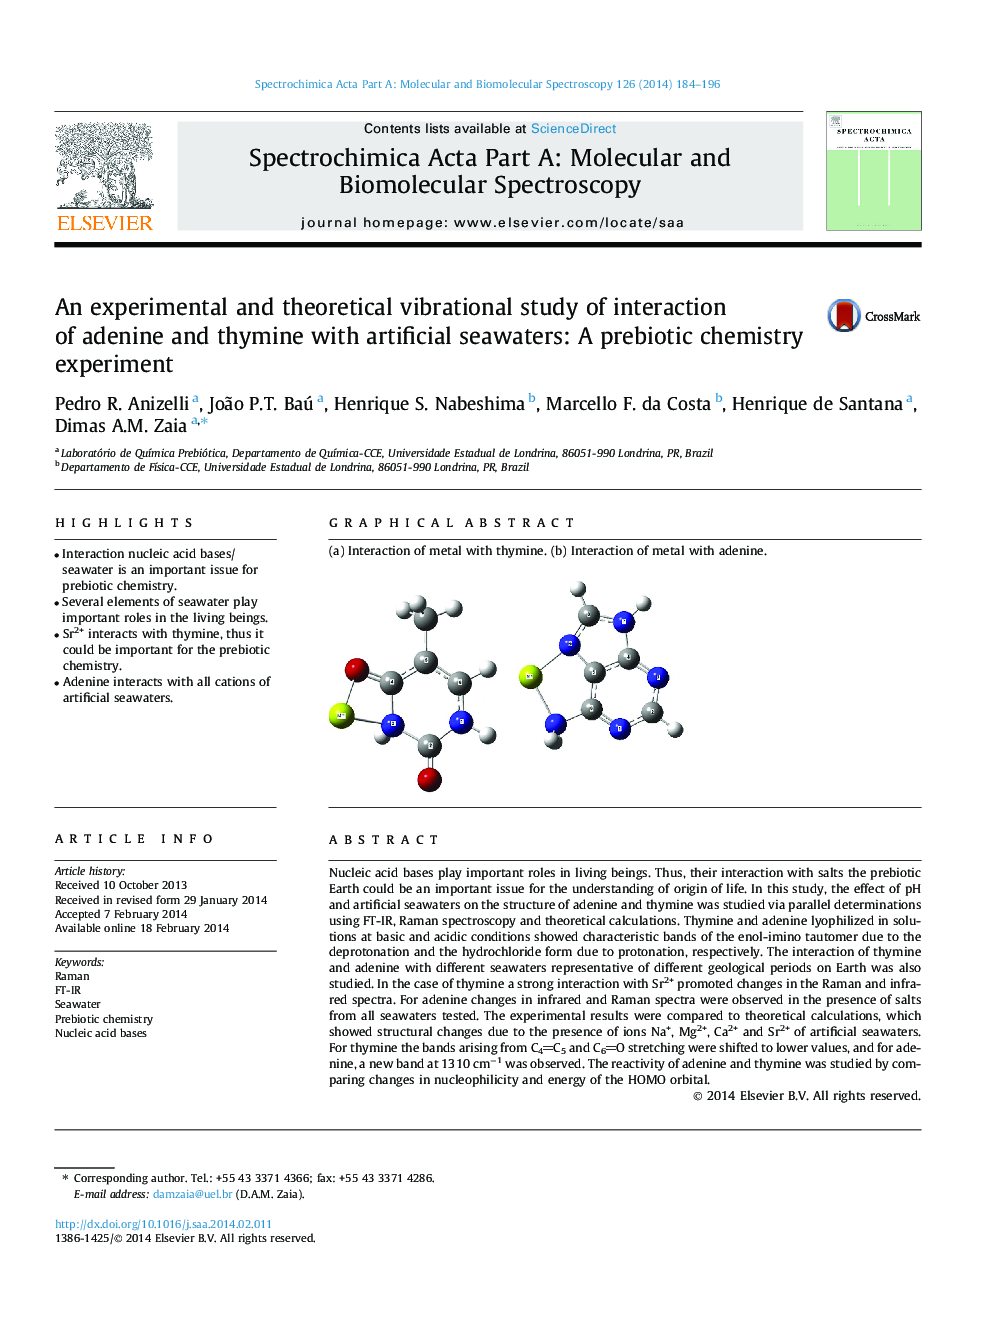 An experimental and theoretical vibrational study of interaction of adenine and thymine with artificial seawaters: A prebiotic chemistry experiment